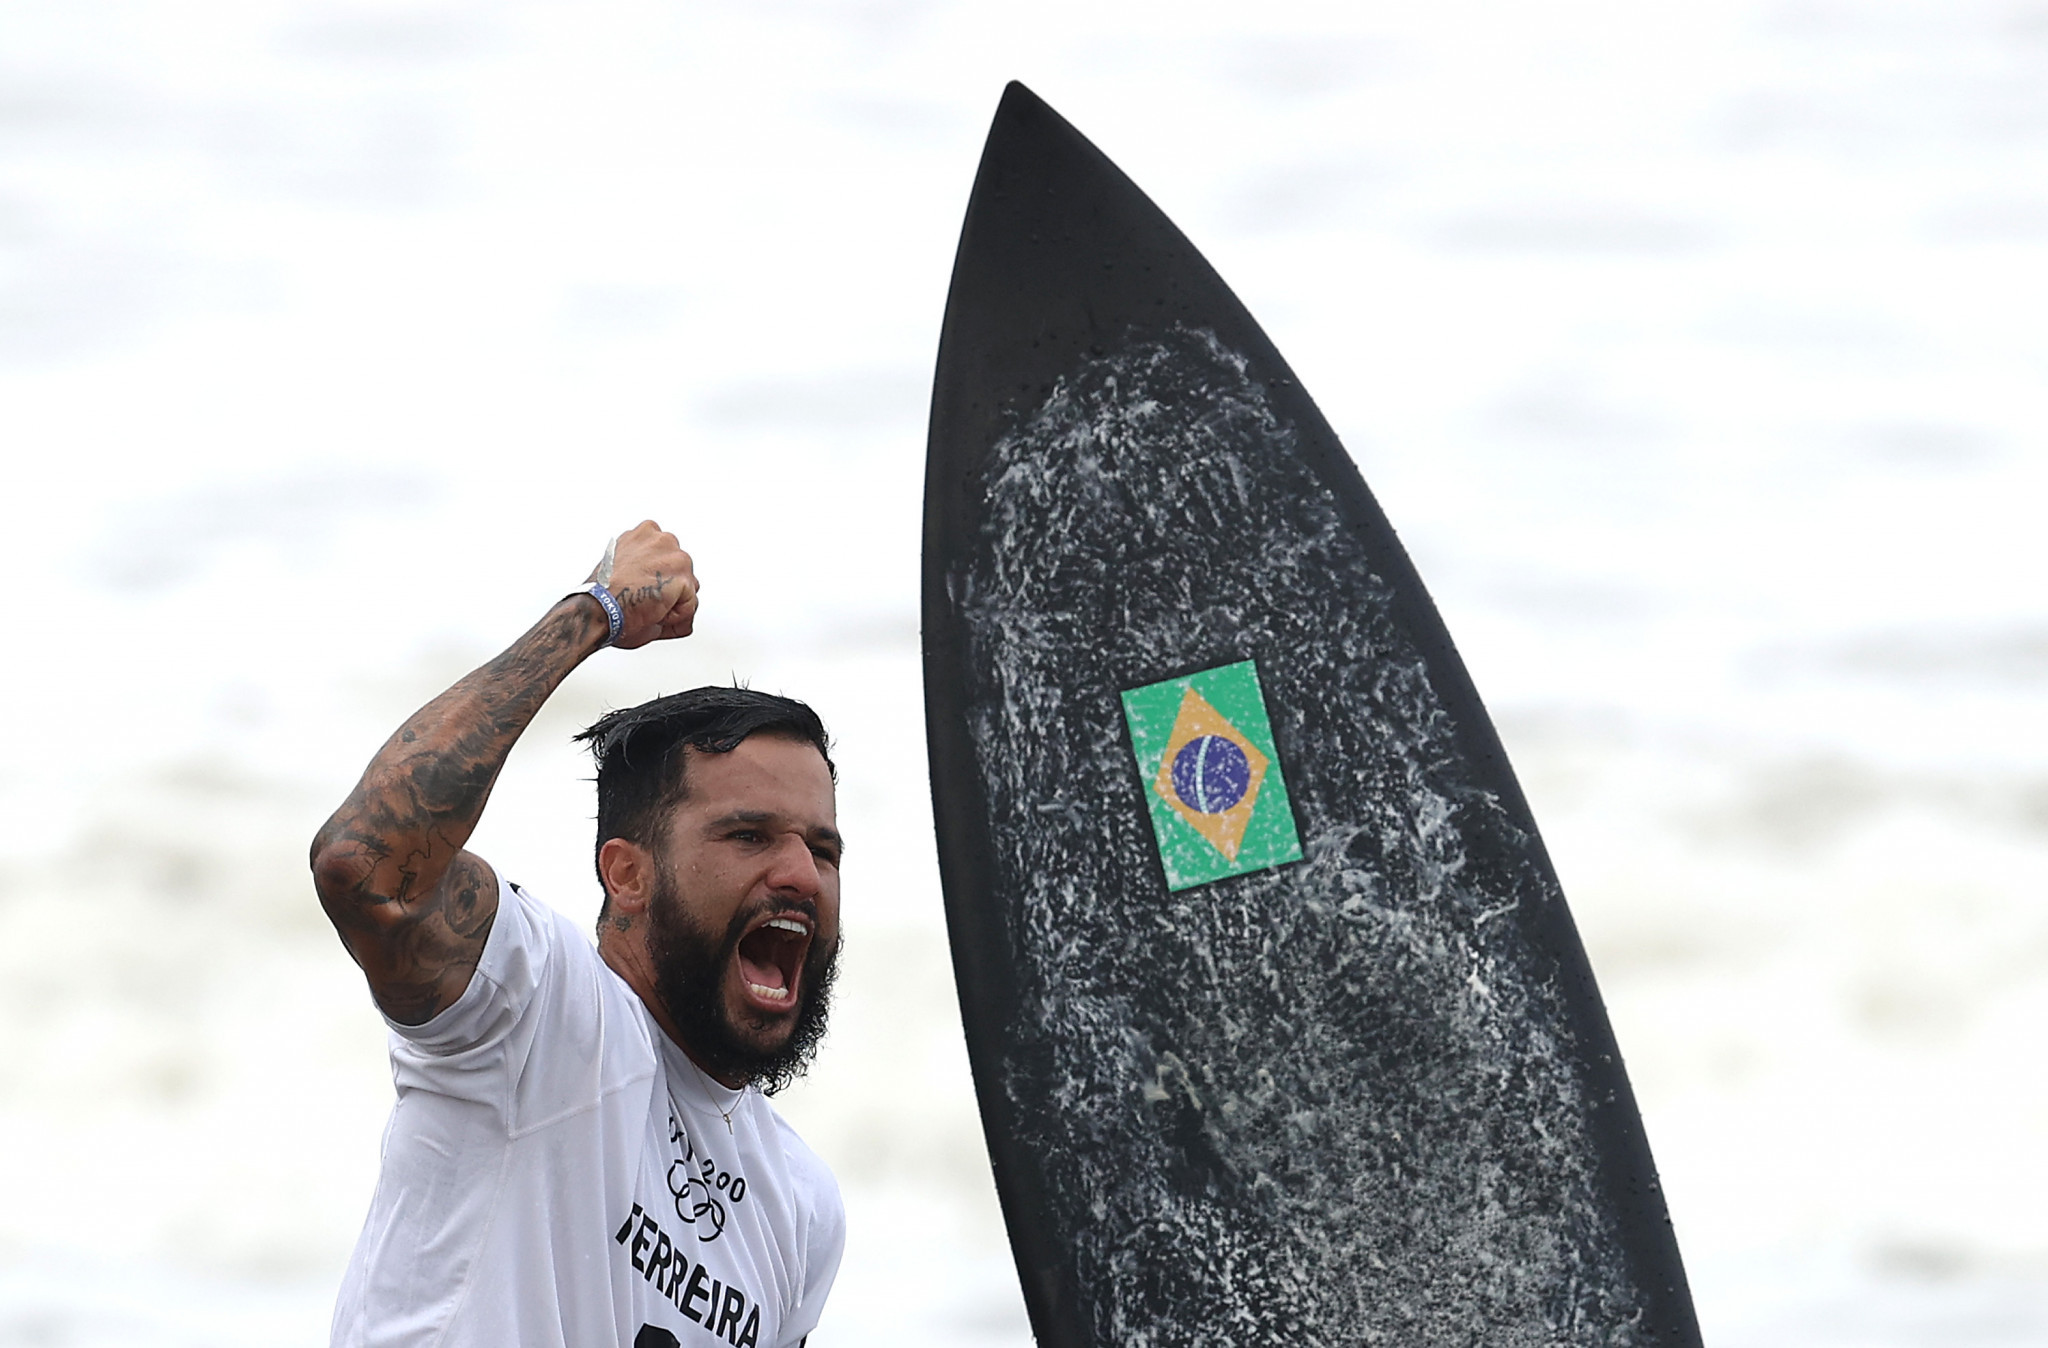 Brazil's Italo Ferreira won the men's surfing title at Tokyo 2020 ©Getty Images